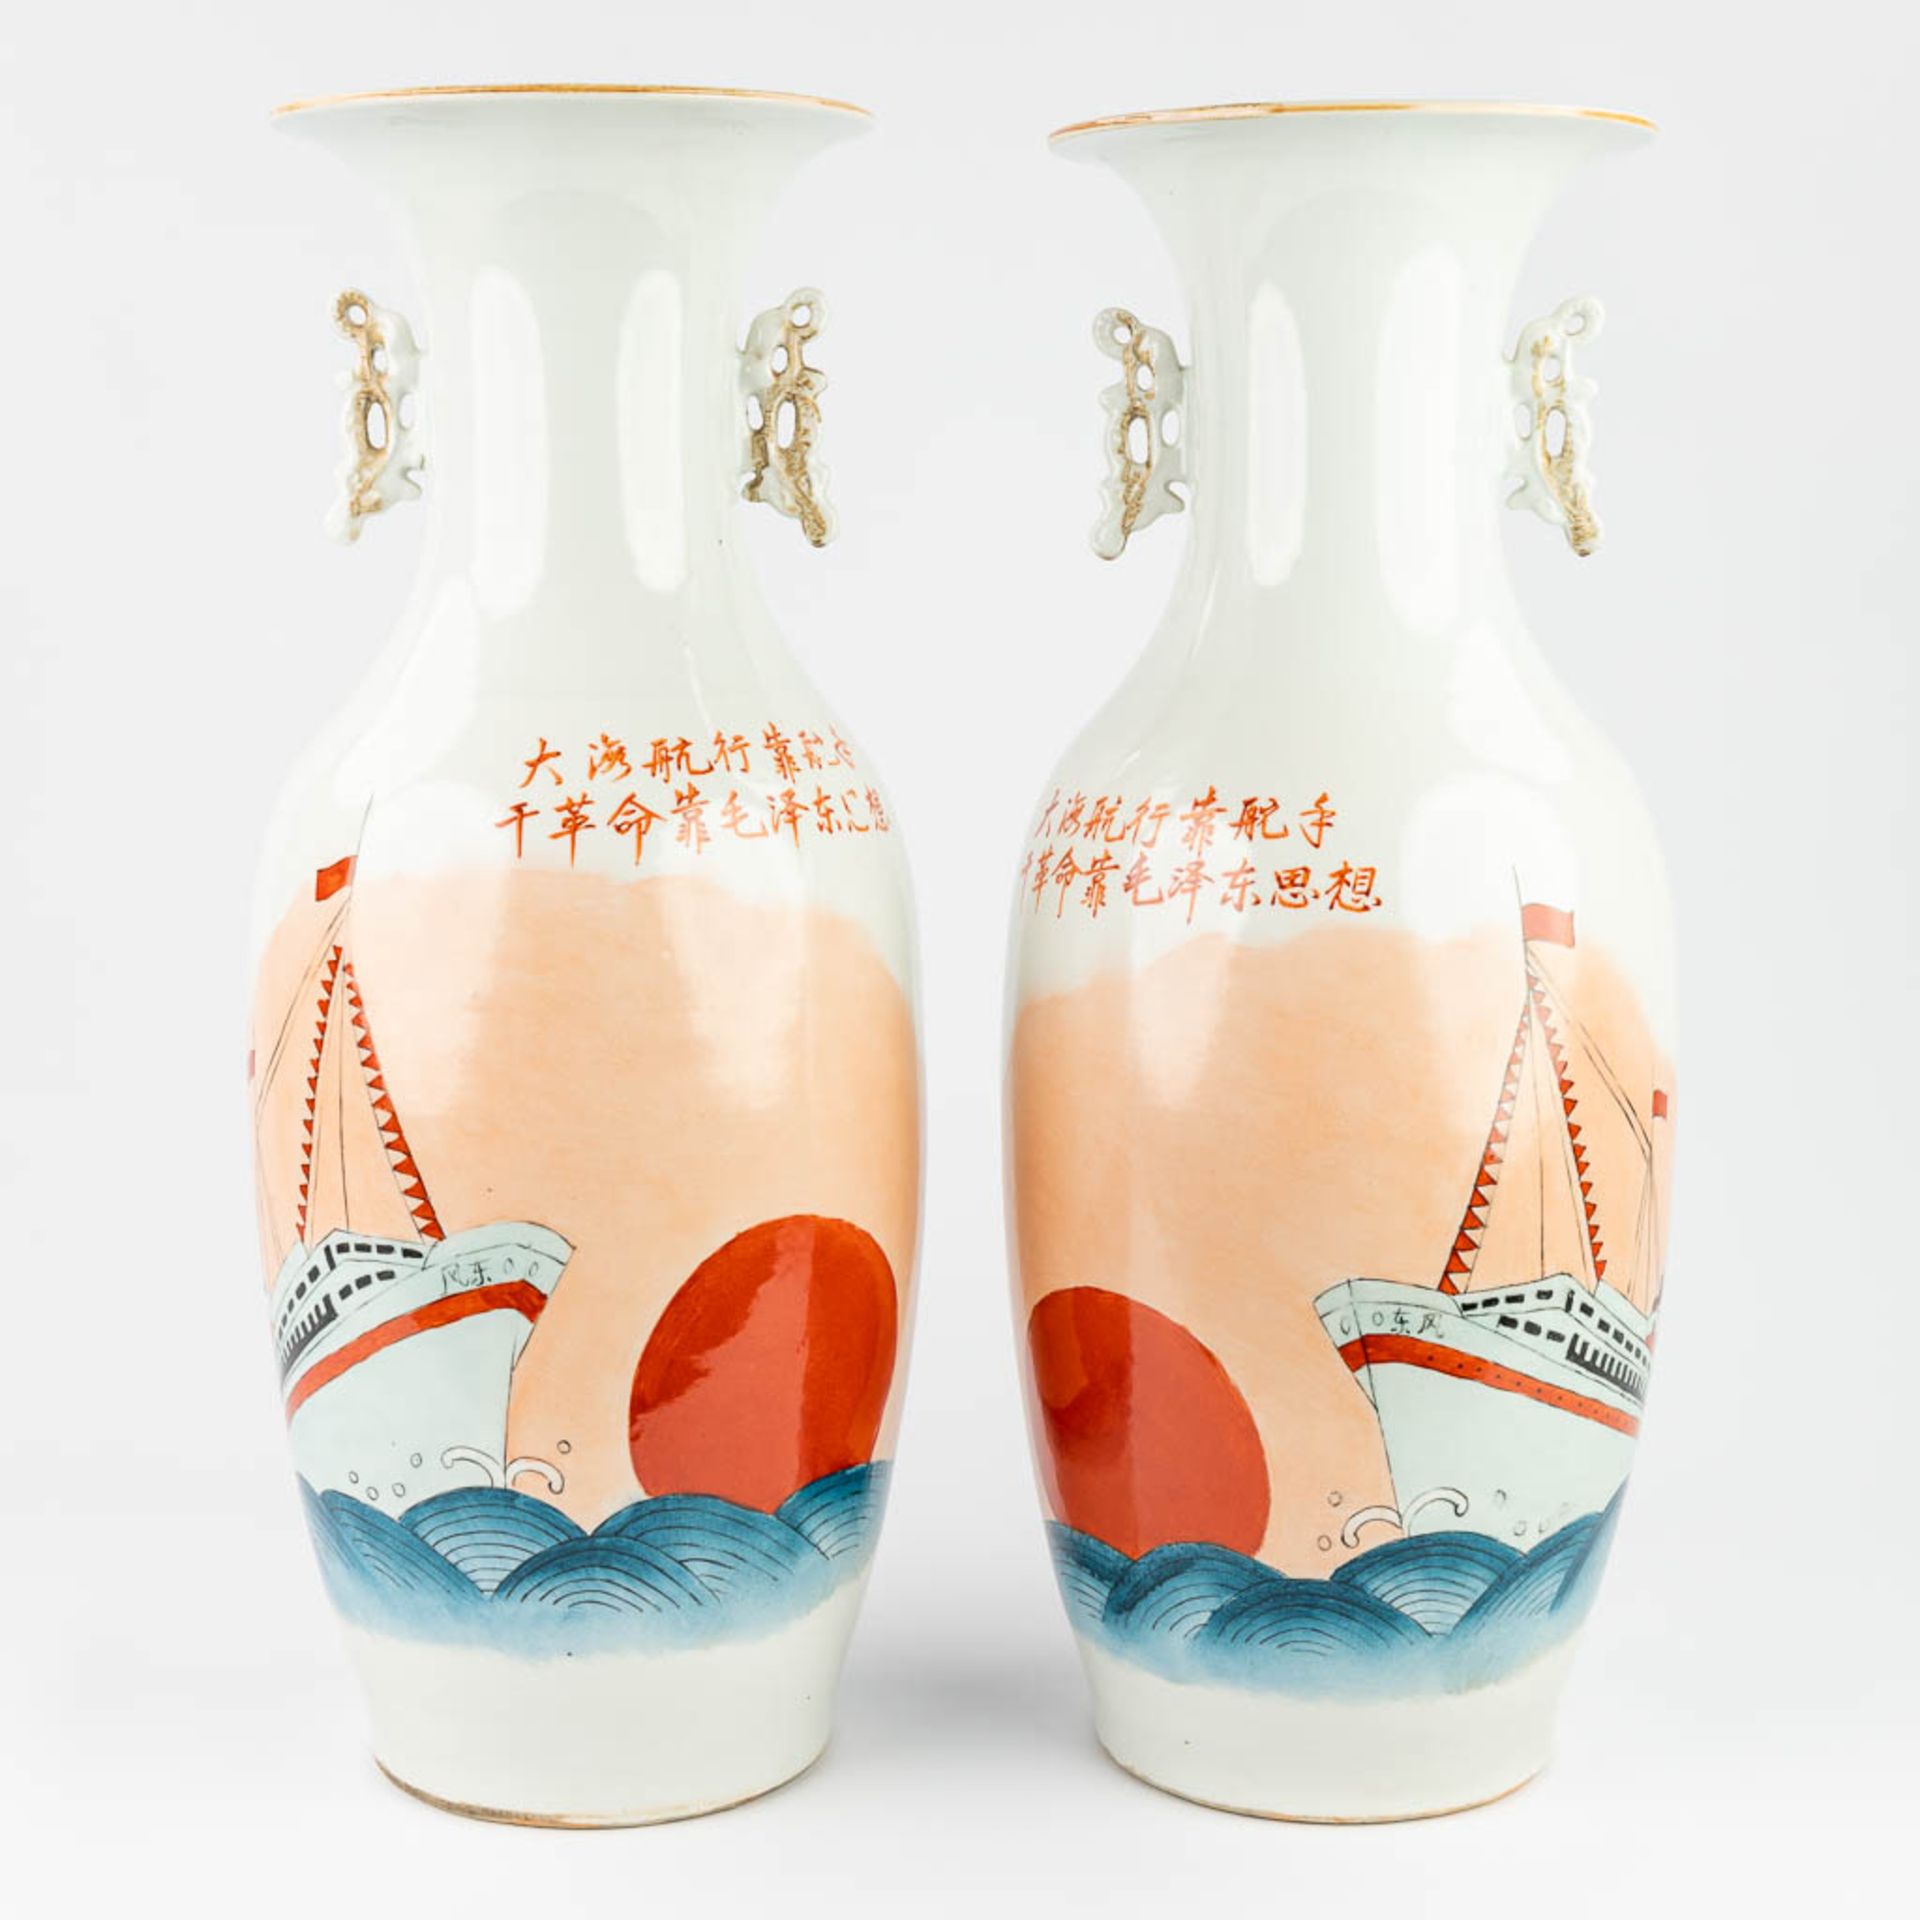 A pair of Chinese vases made of glazed porcelain, and decorated with ships (59,5 x 23 cm)